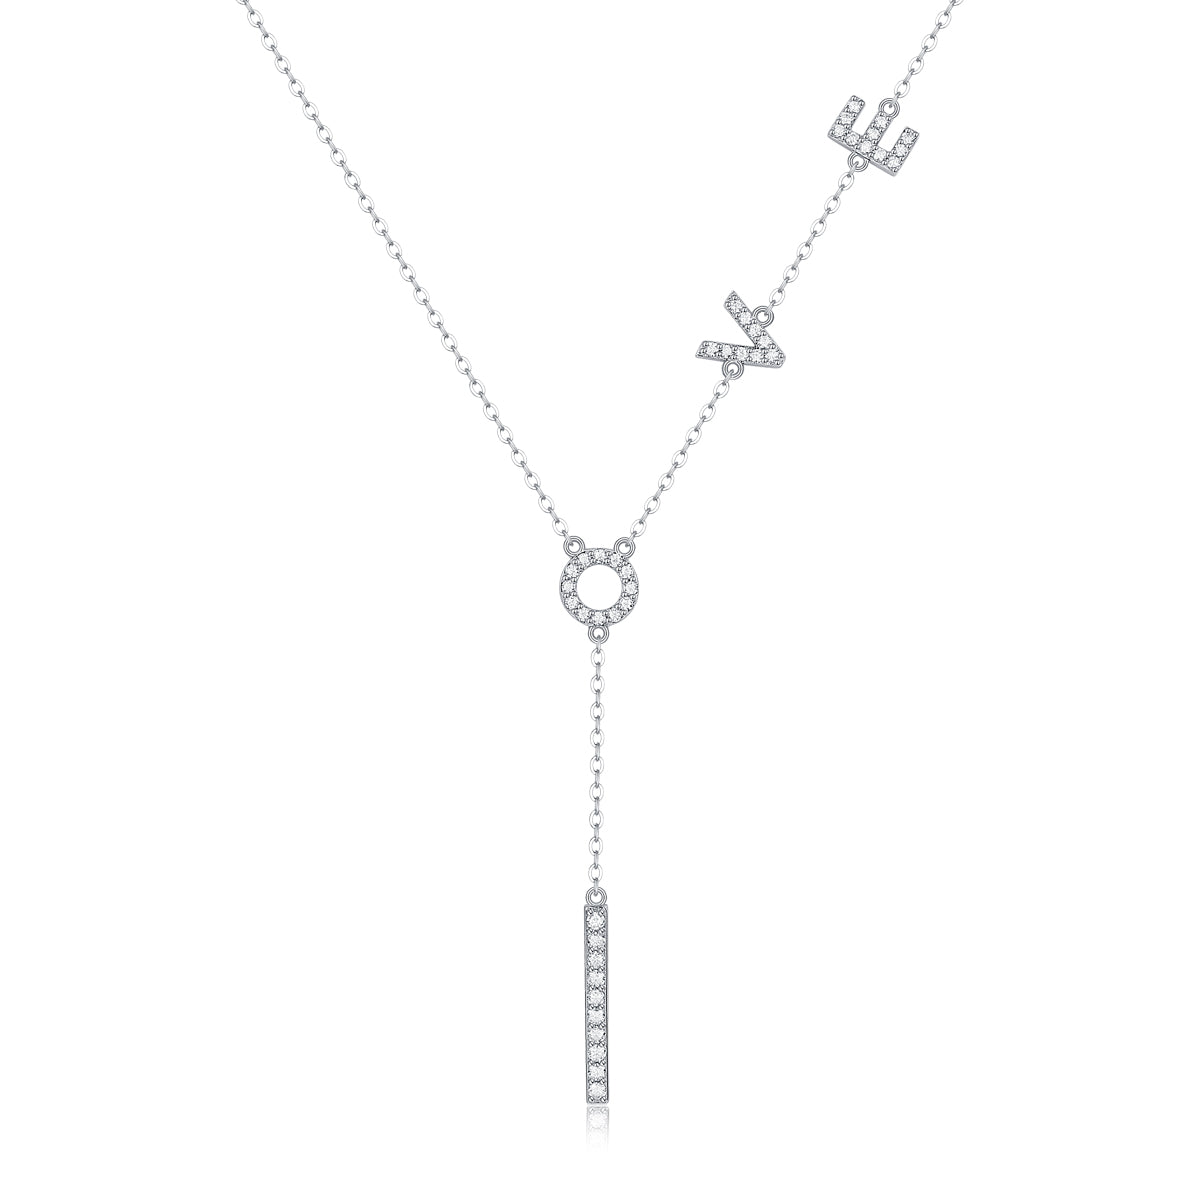 S925 Silver  Adjustable Moissanite Love lingers Necklaces N12473